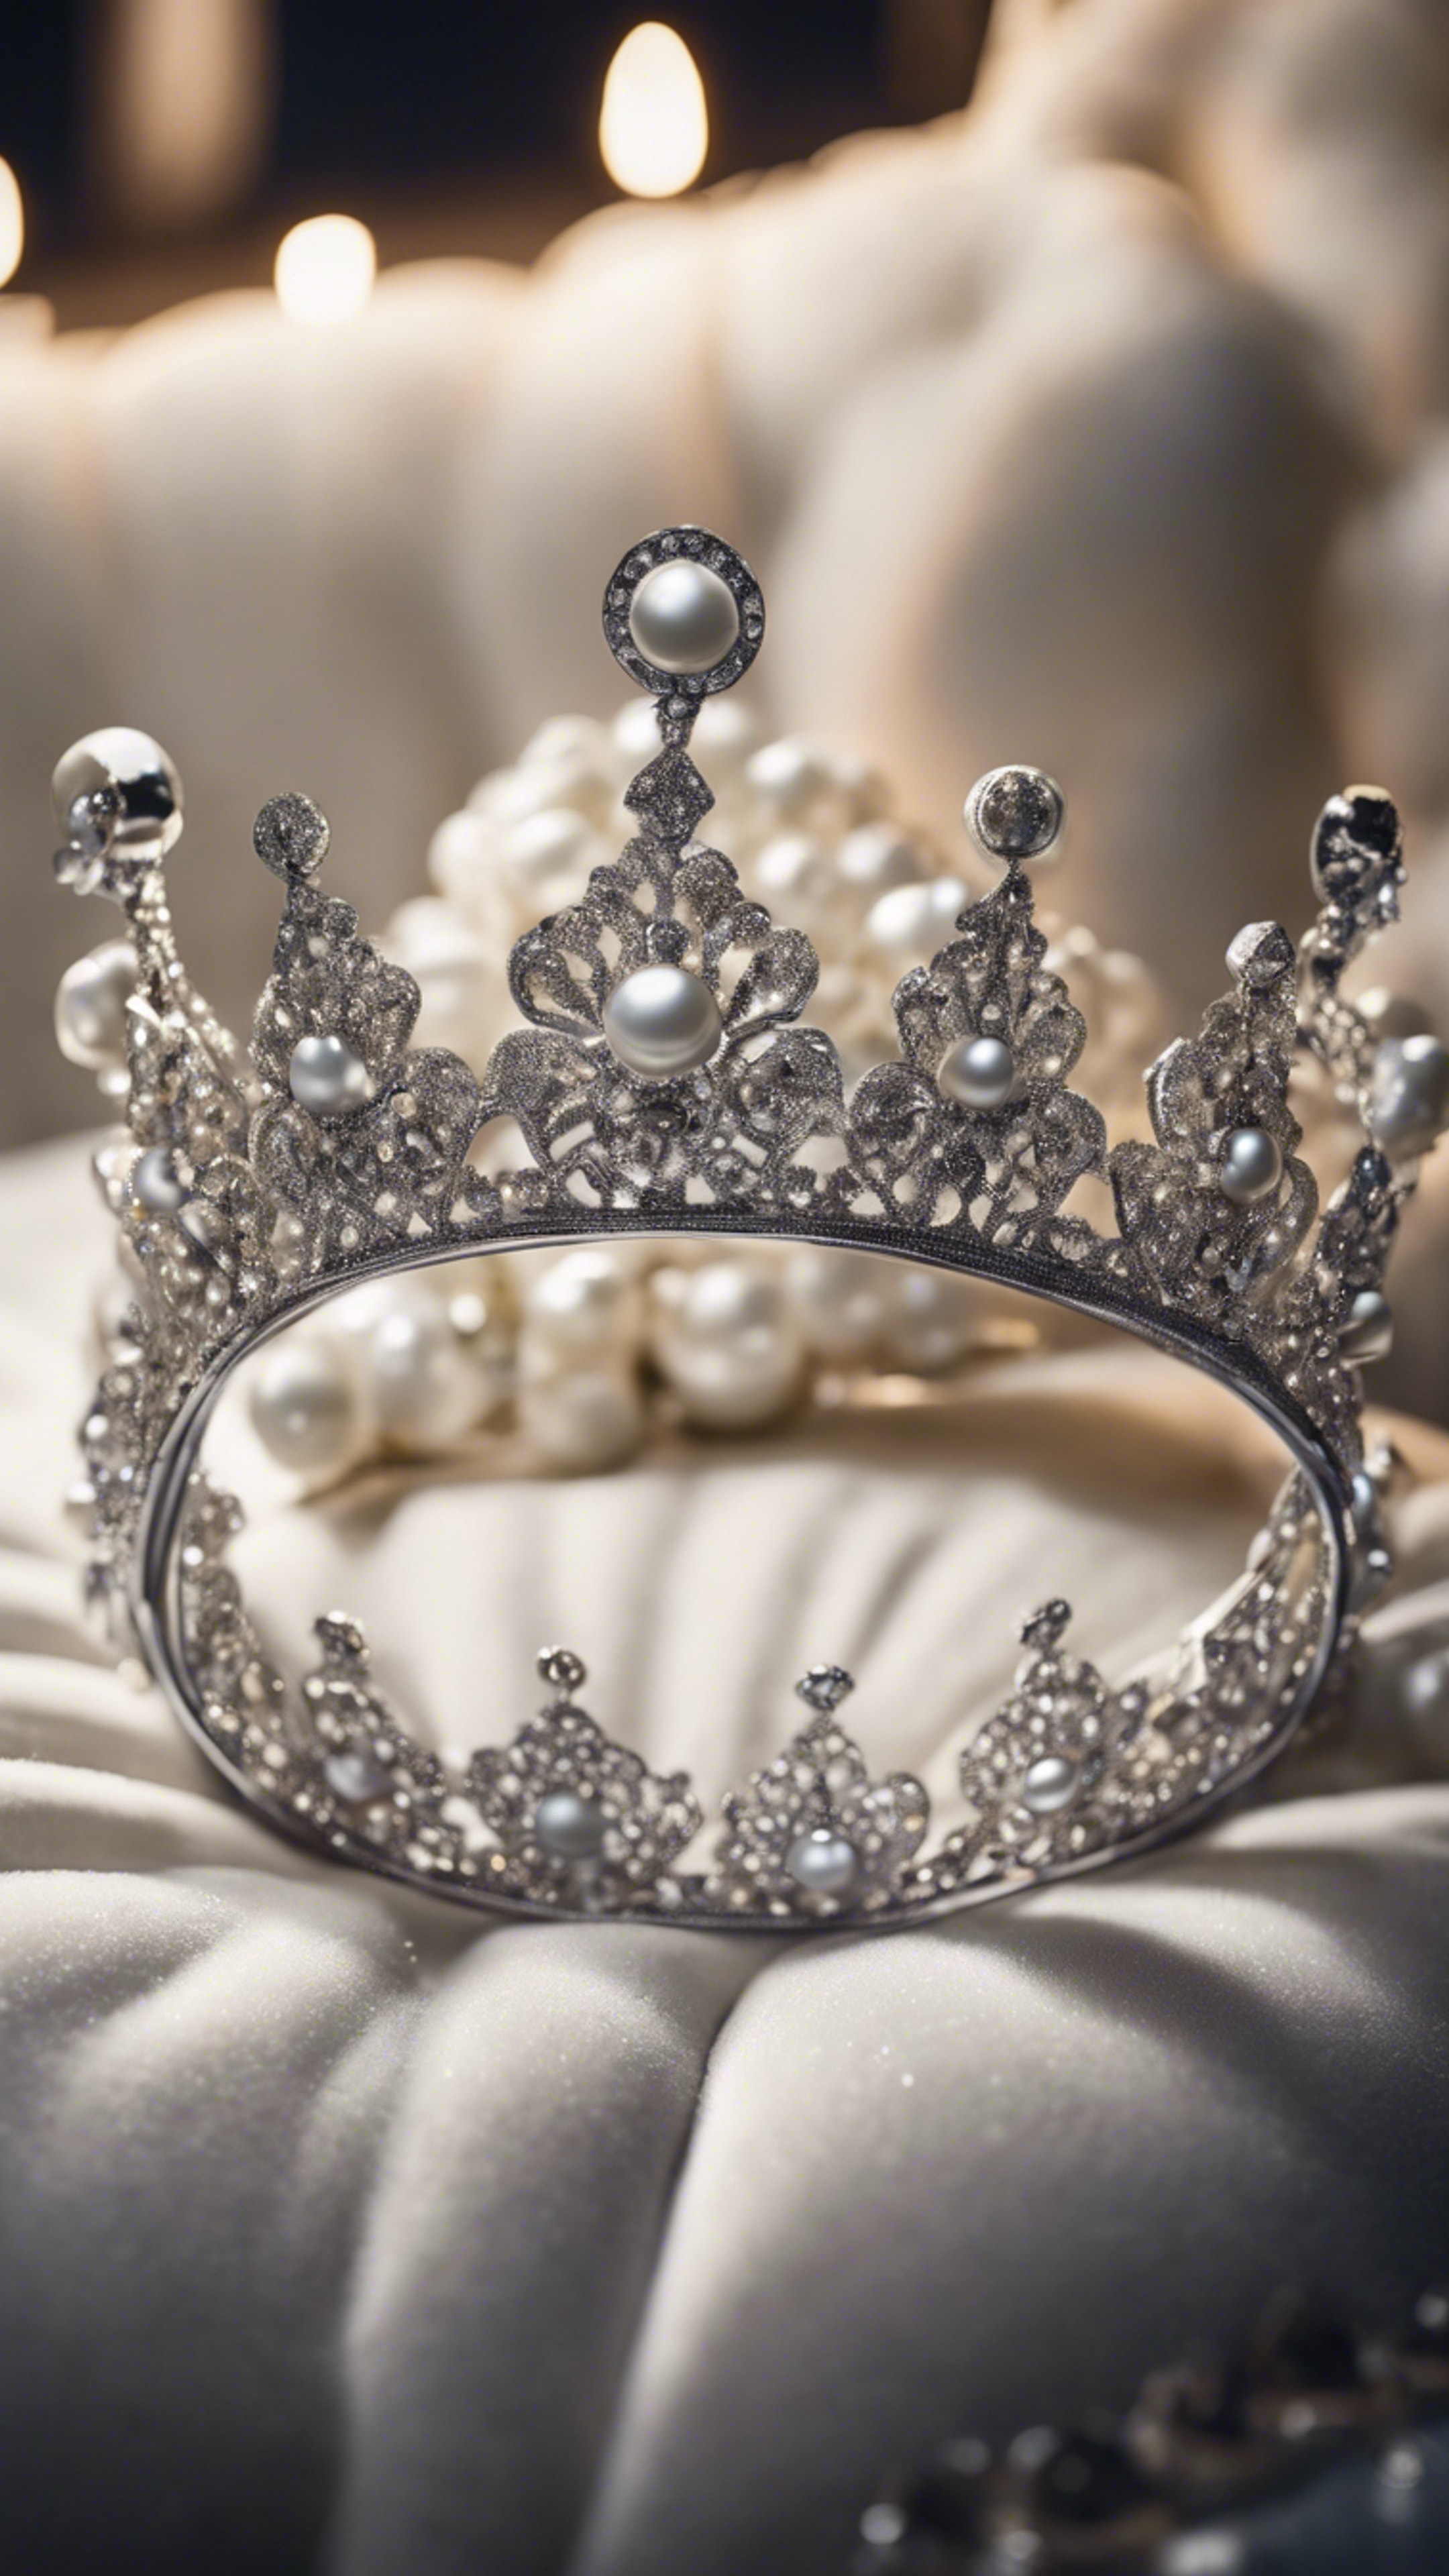 A classic silver crown embellished with pearls and diamonds lying on a white velvet cushion at night.壁紙[f90278dd6b1c4e9ca8cc]